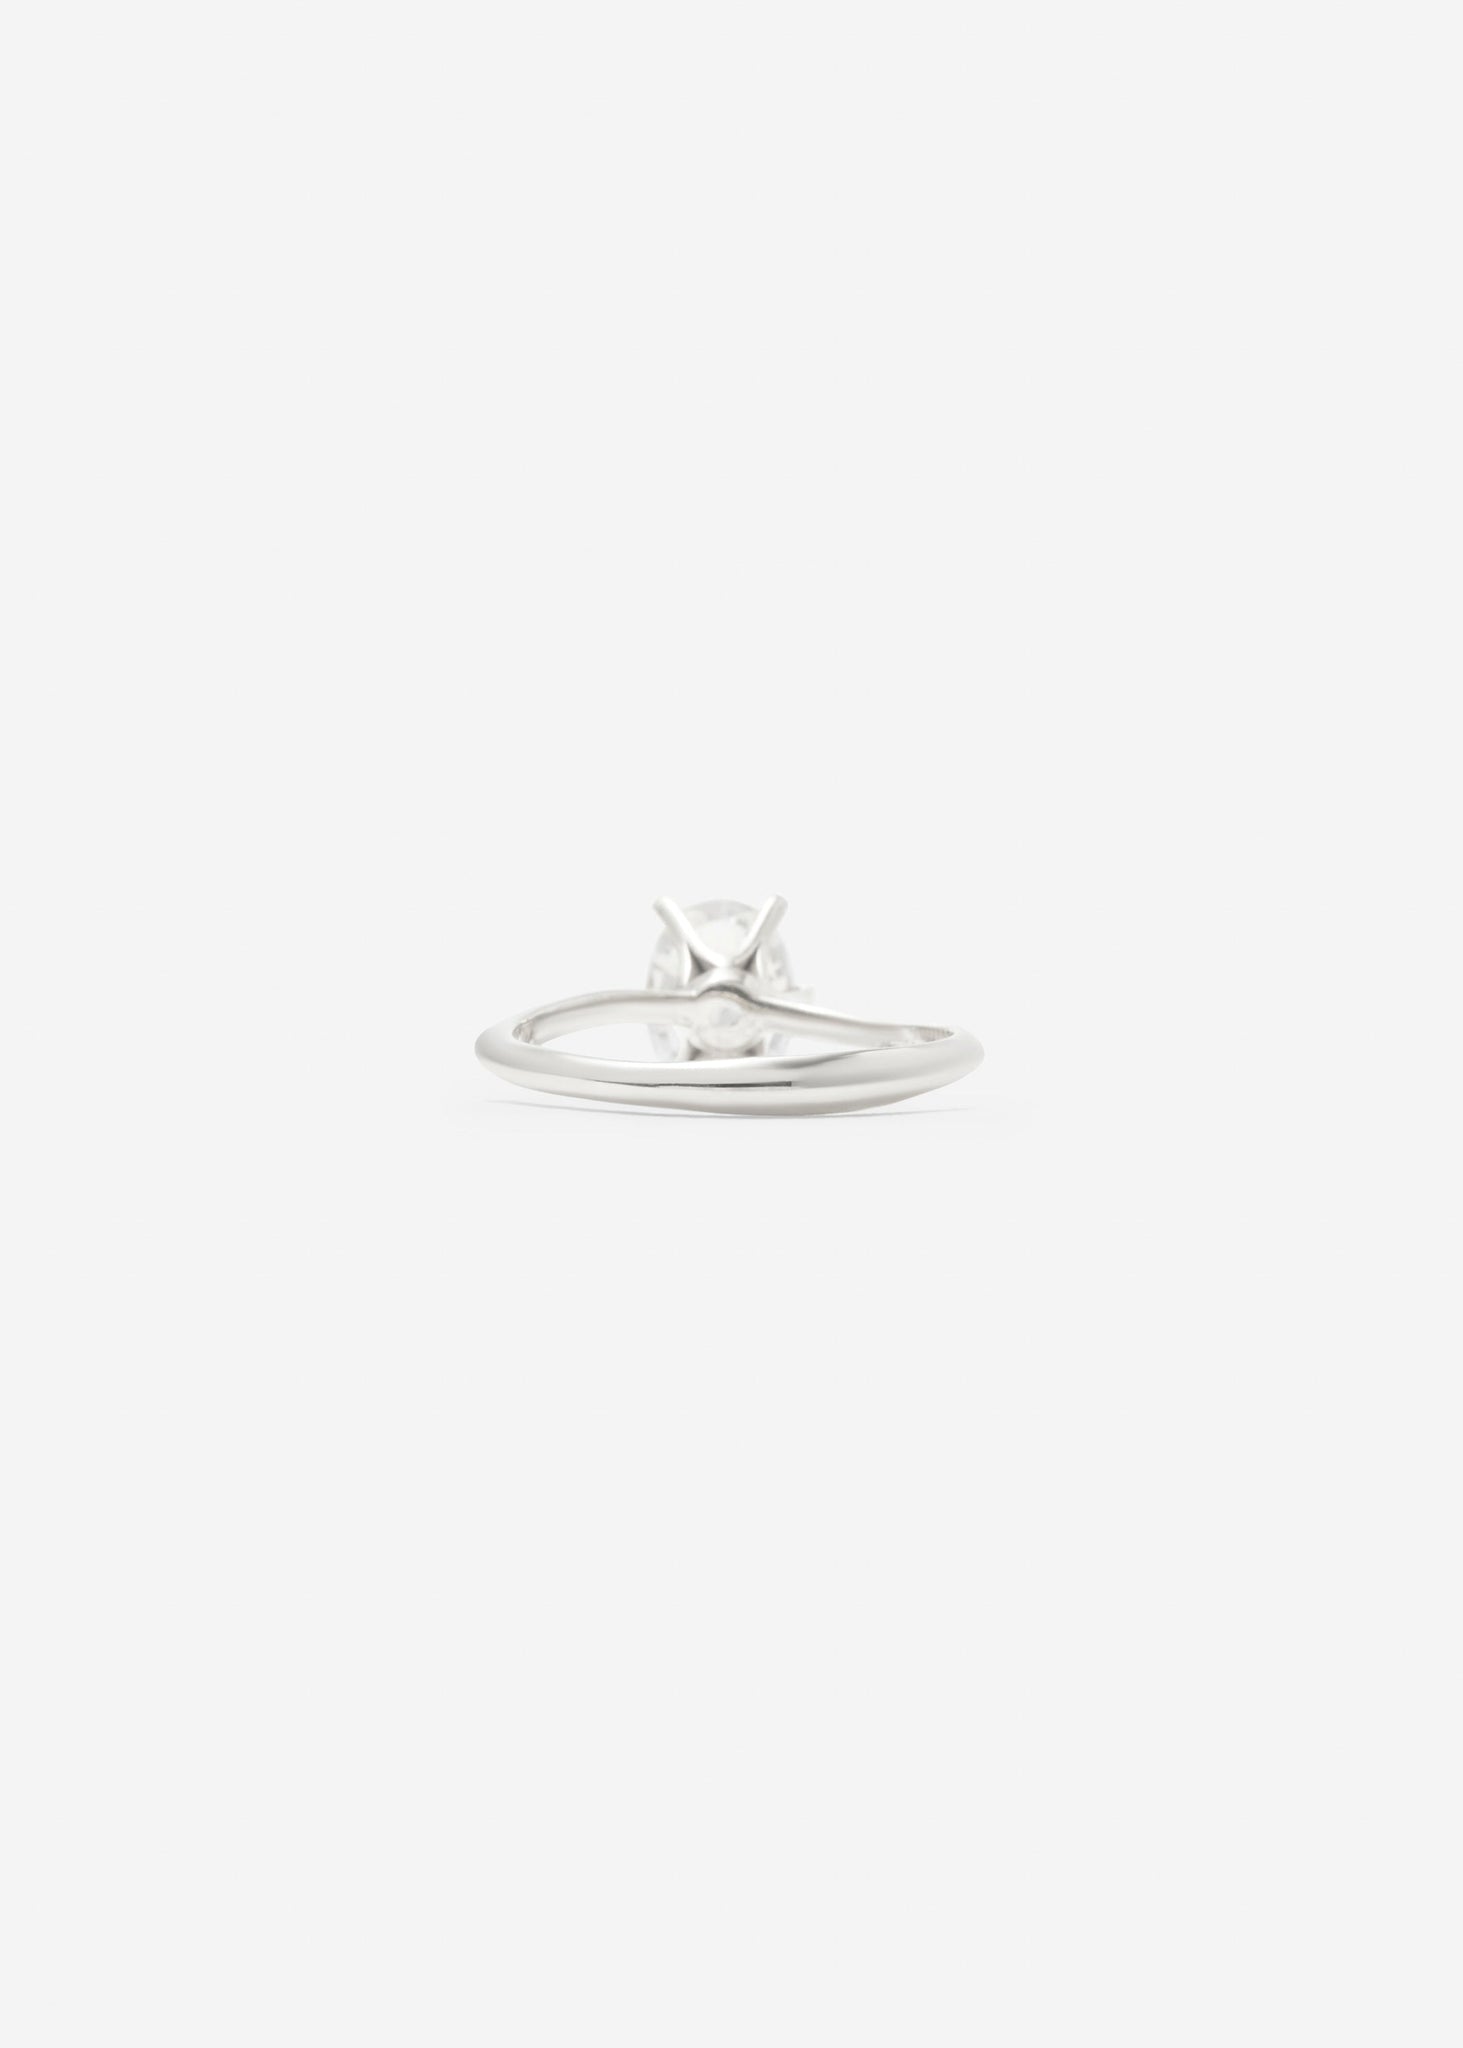 Oval Solitaire Ring Maxi 0.7 - 0.9 Ct - Rings - Customised - 4